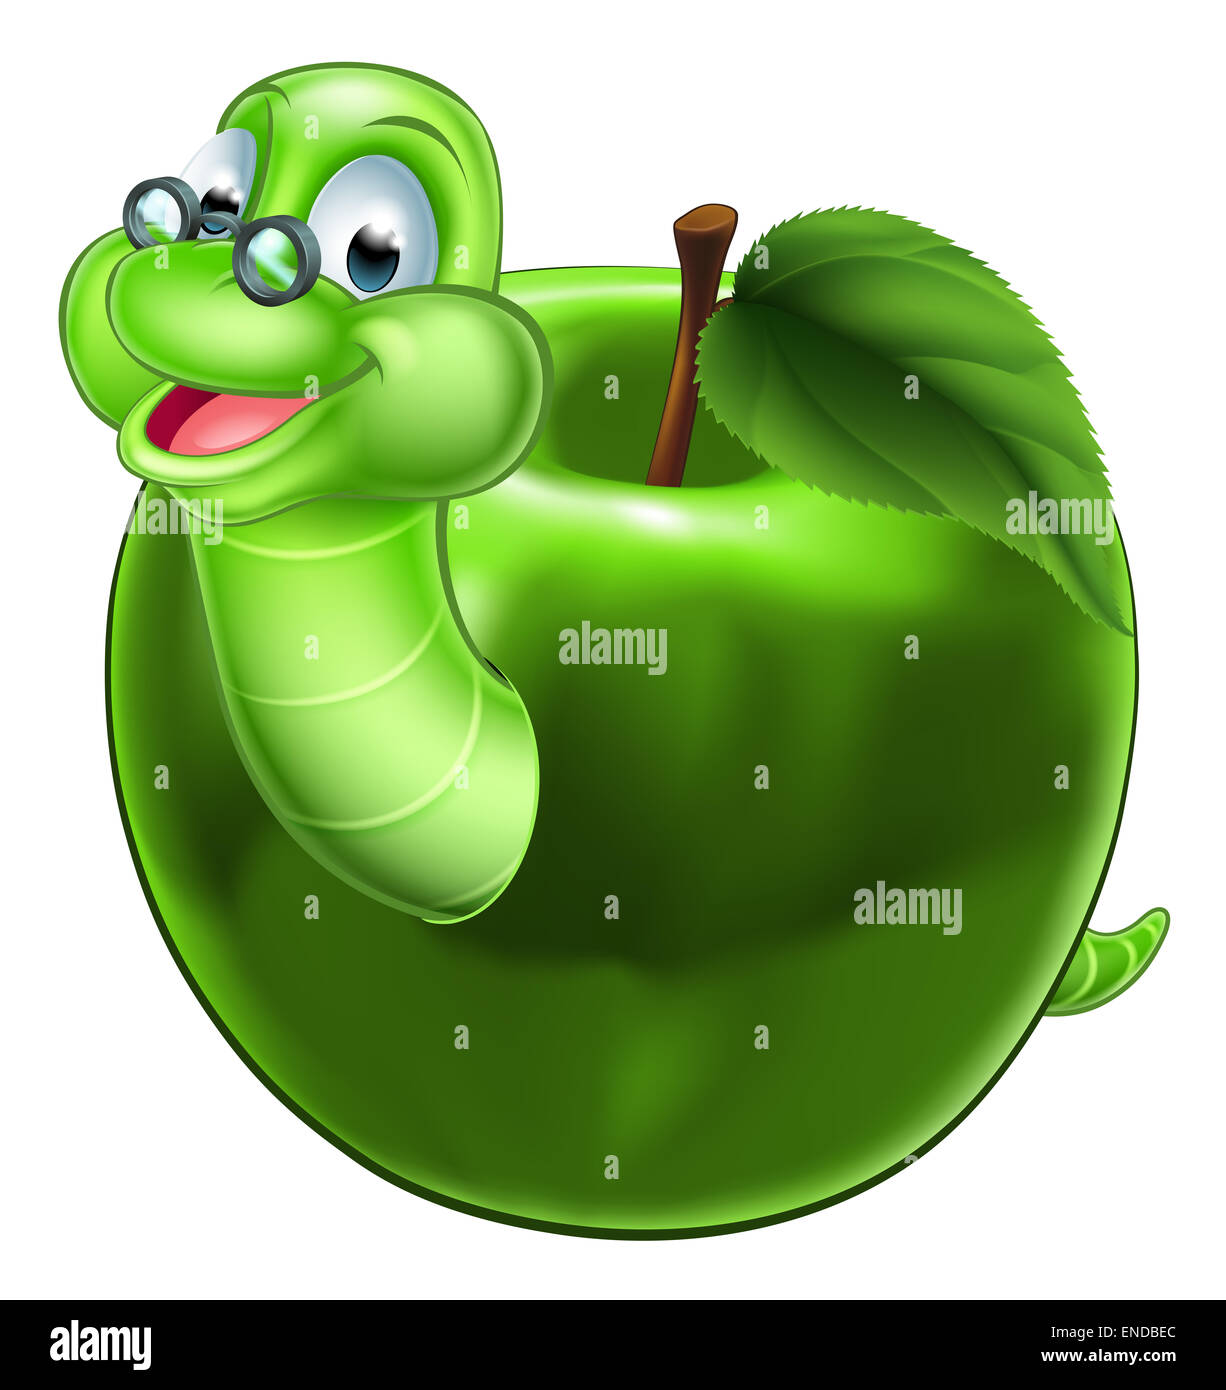 A happy cute cartoon caterpillar bookworm worm or caterpillar wearing glasses coming out of an apple Stock Photo